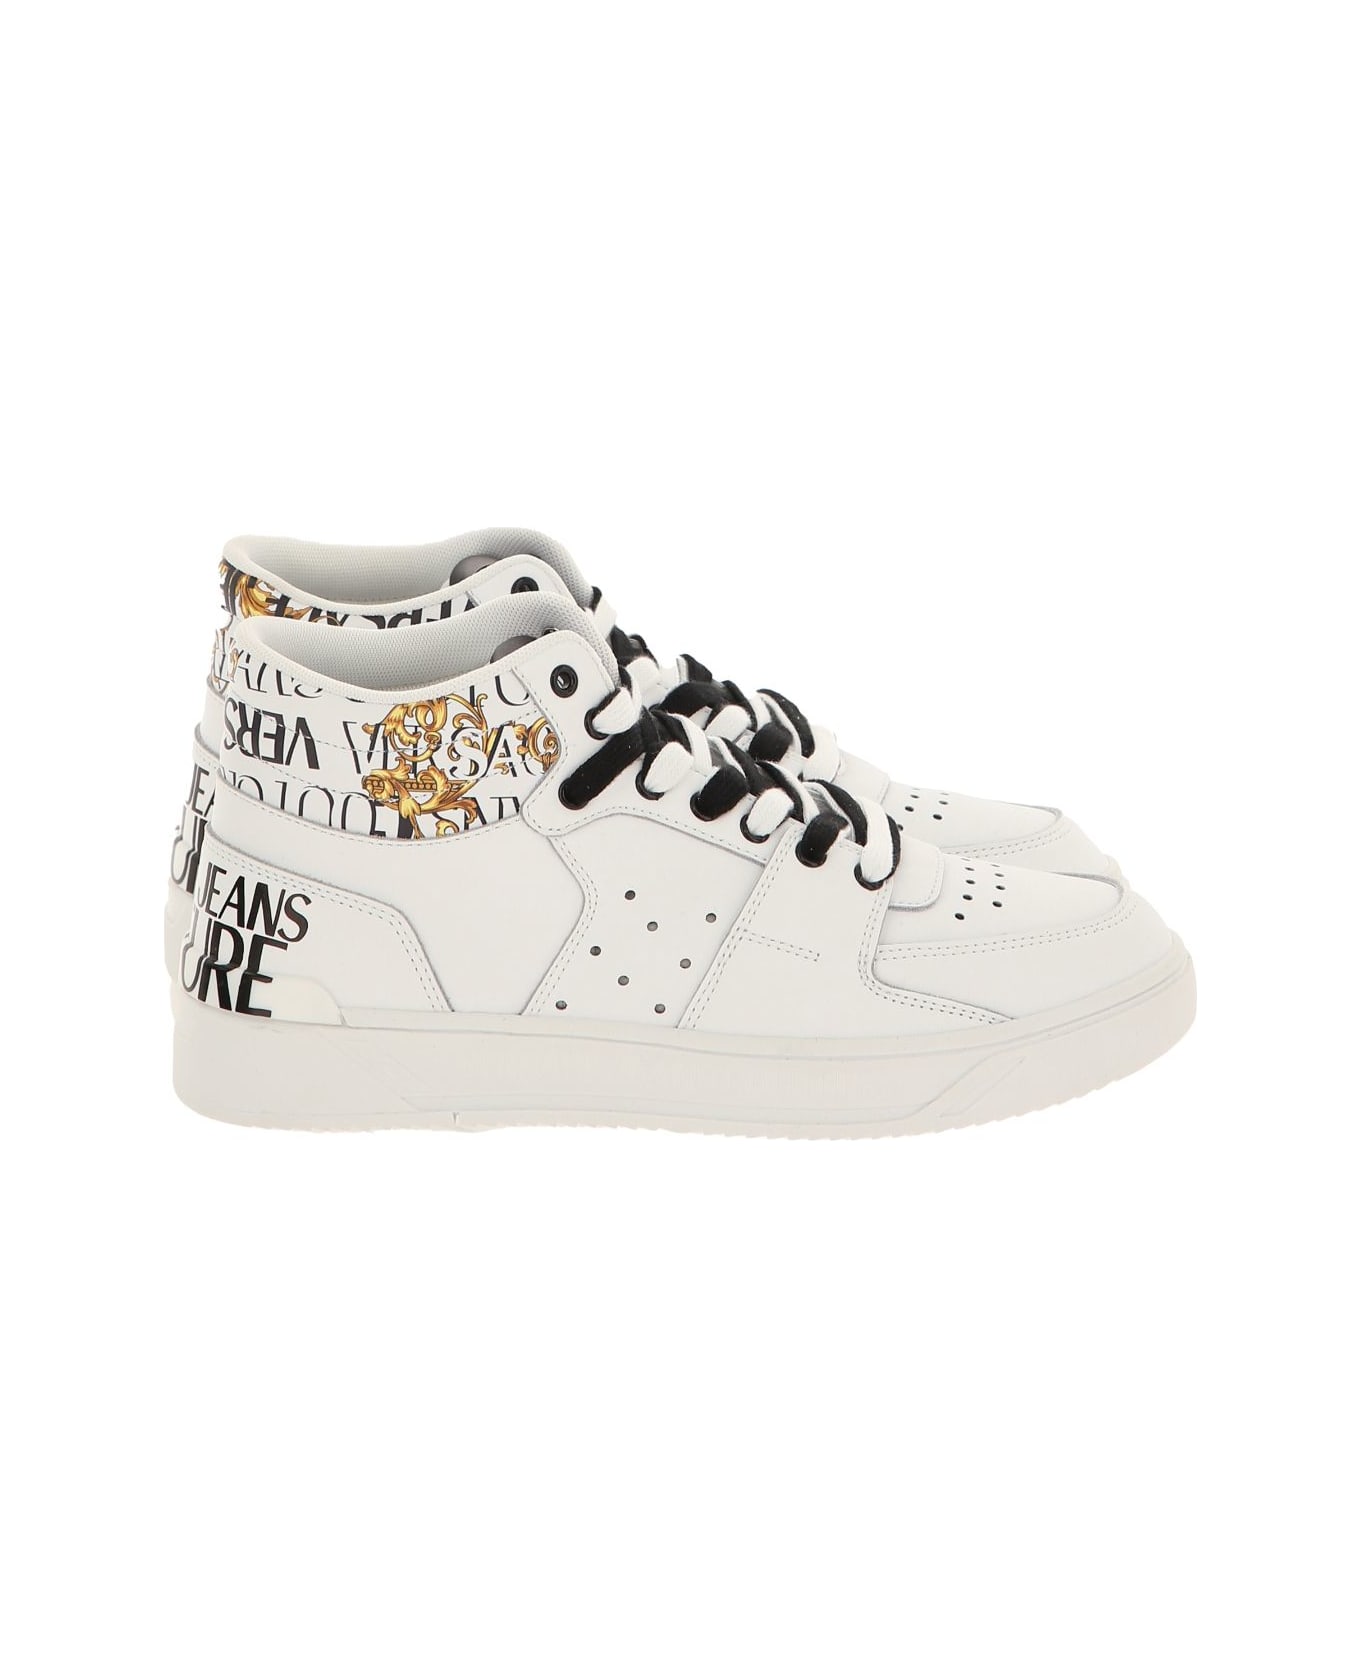 Versace Jeans Couture Sneakers White - White